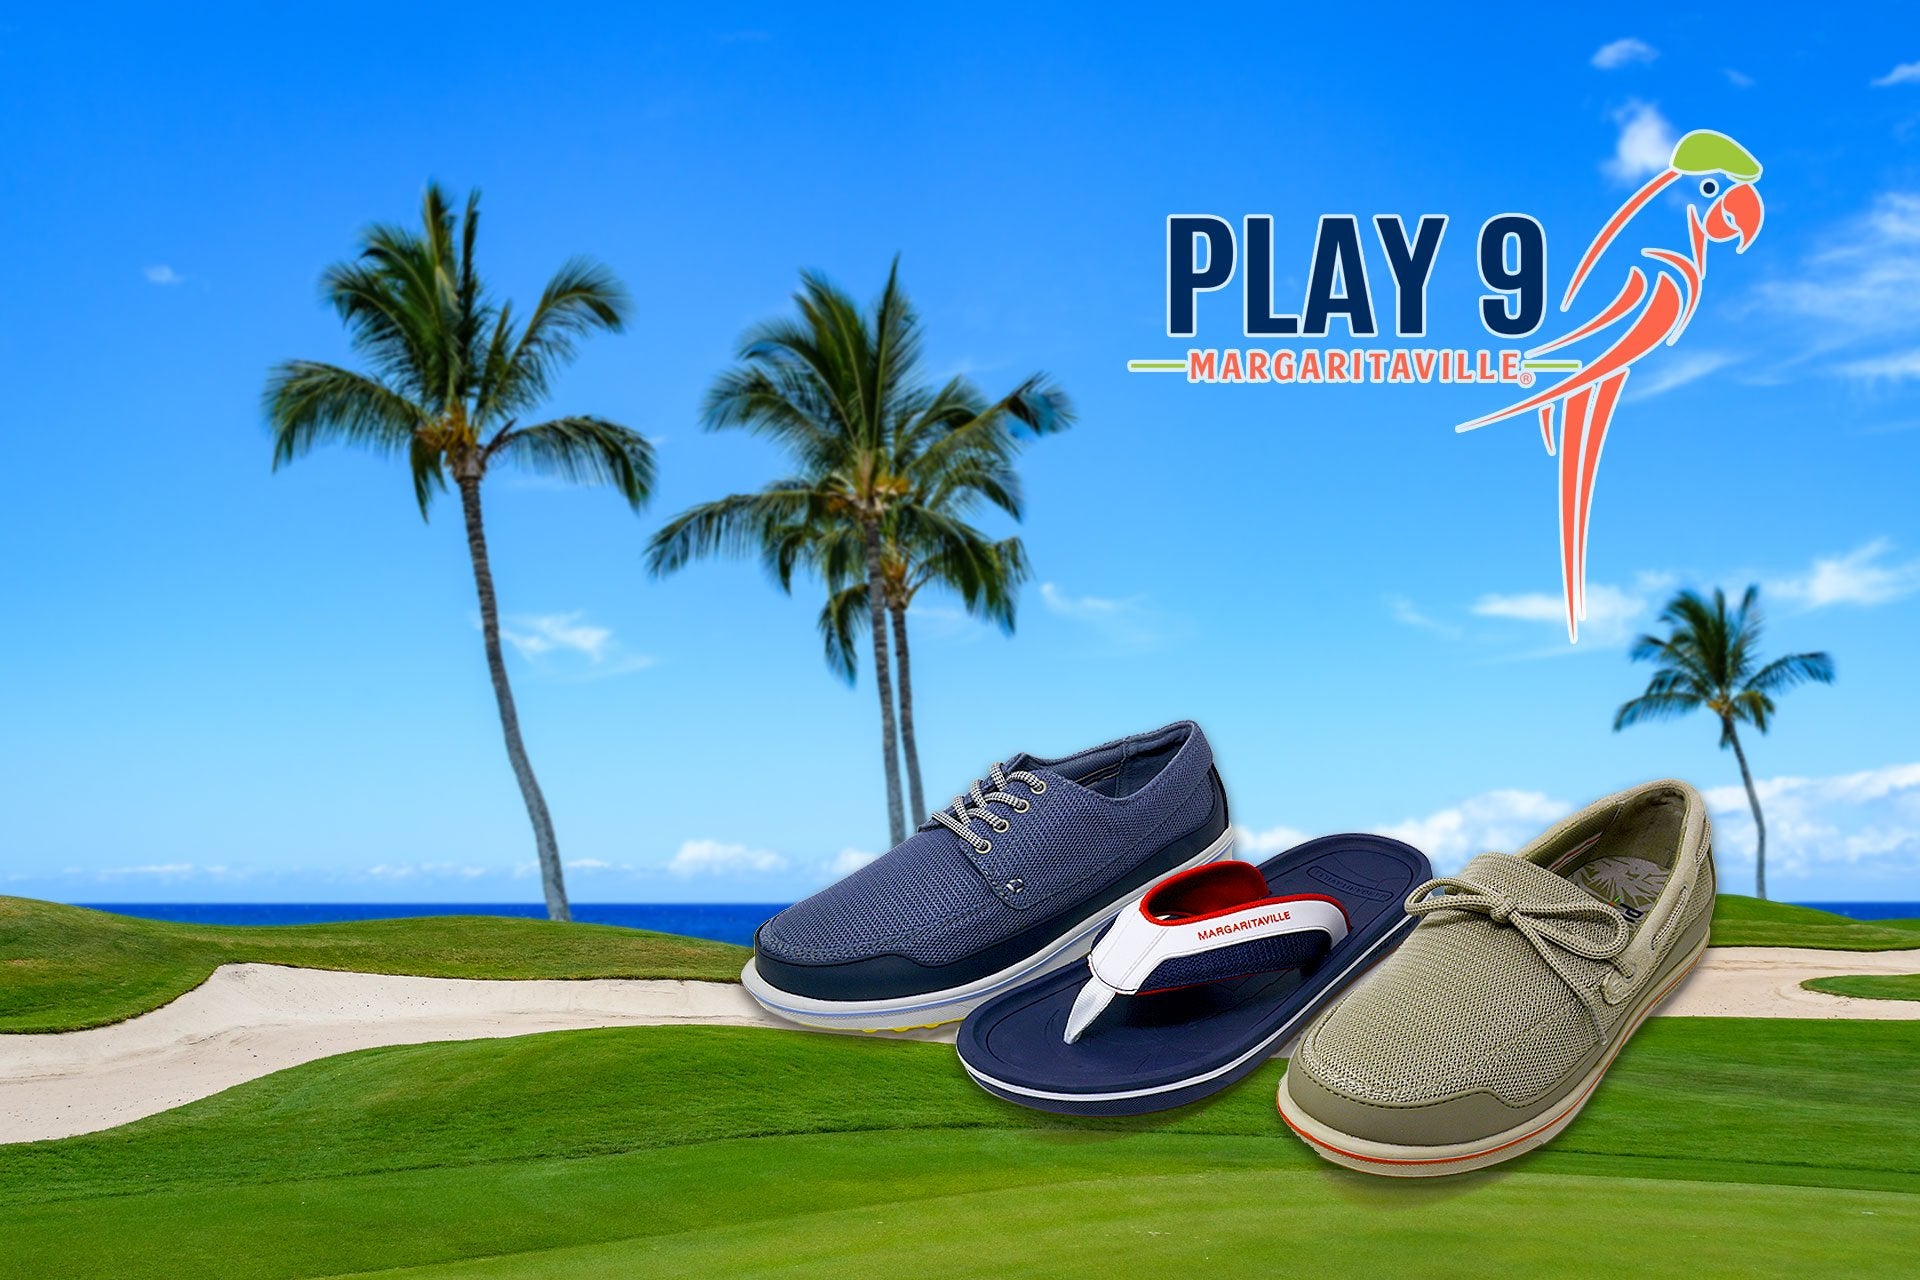 Margaritaville sandals and golf shoes